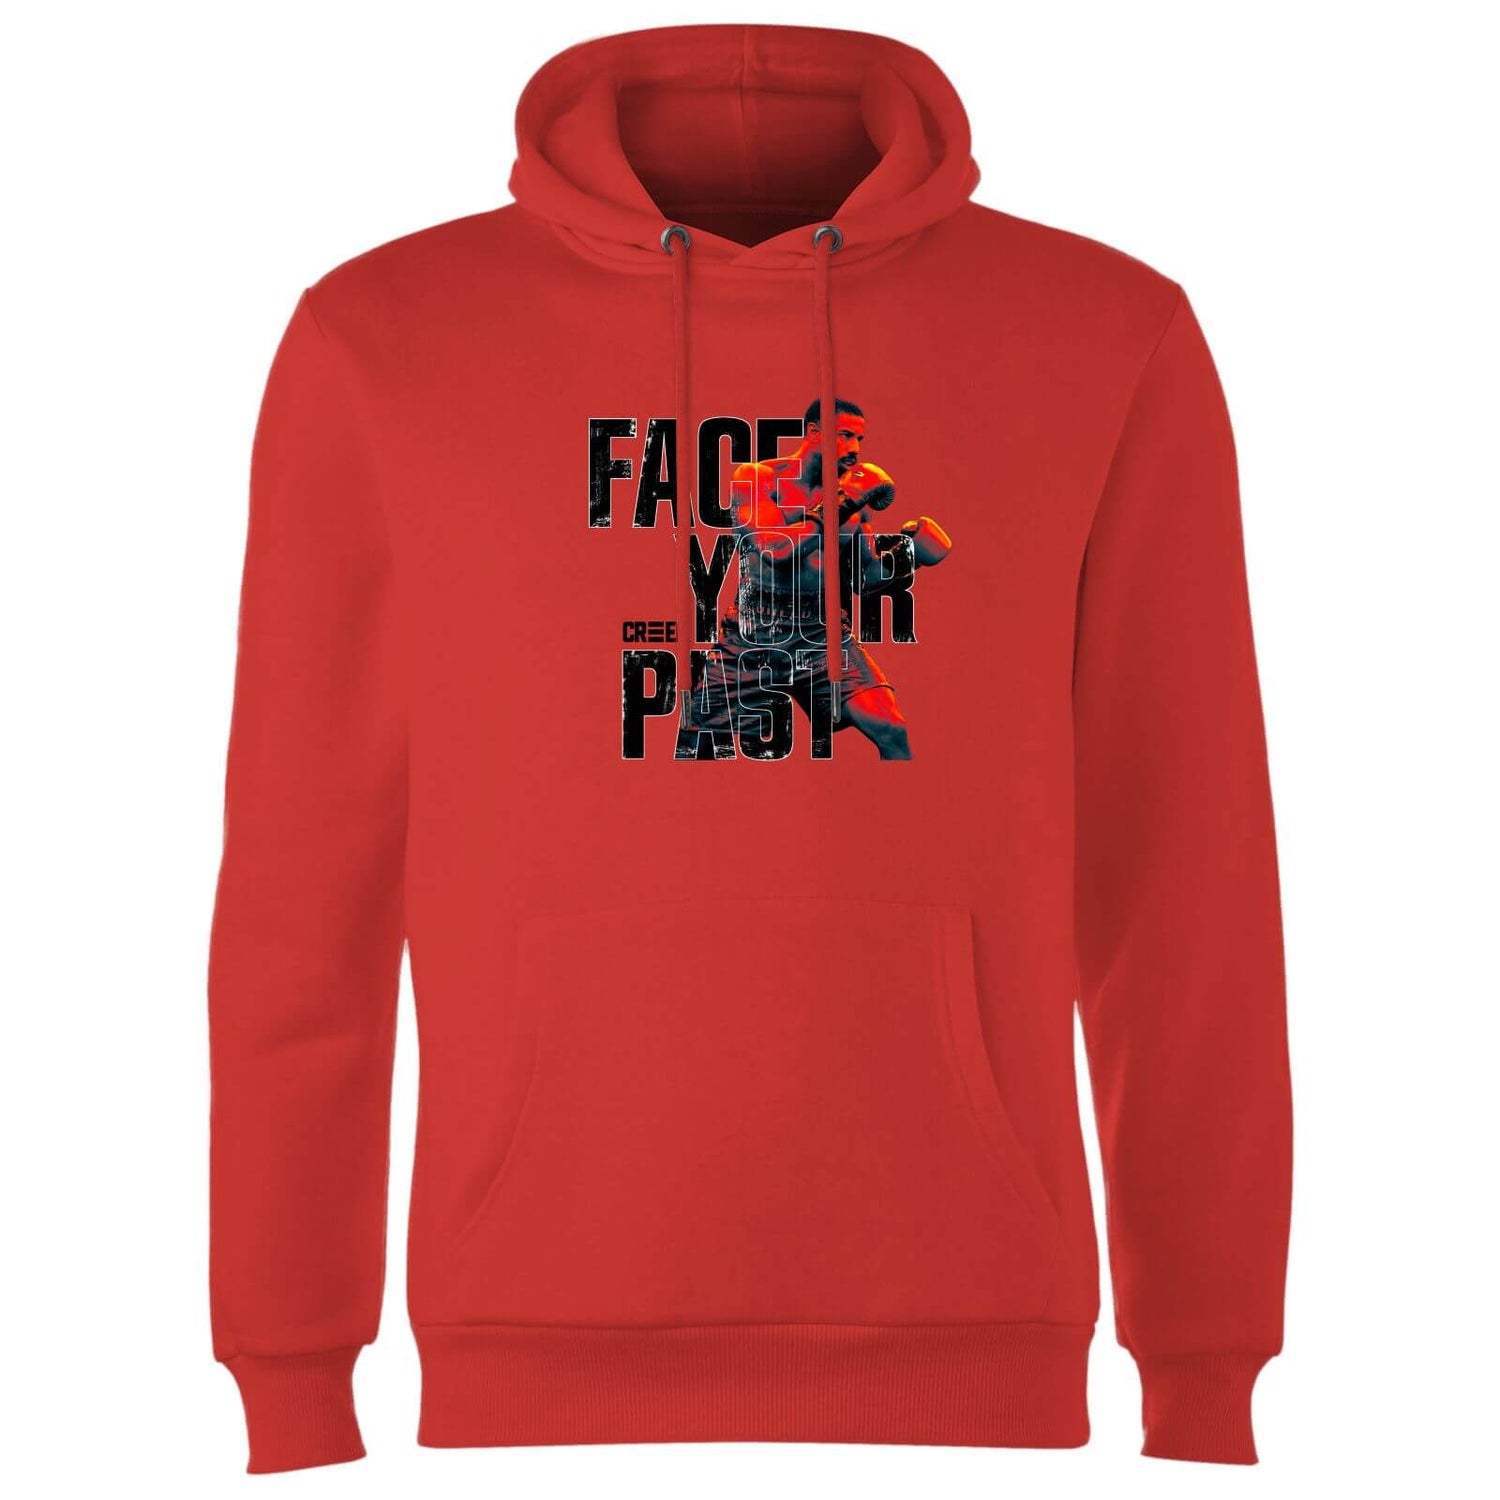 Creed Face Your Past Hoodie - Red - S